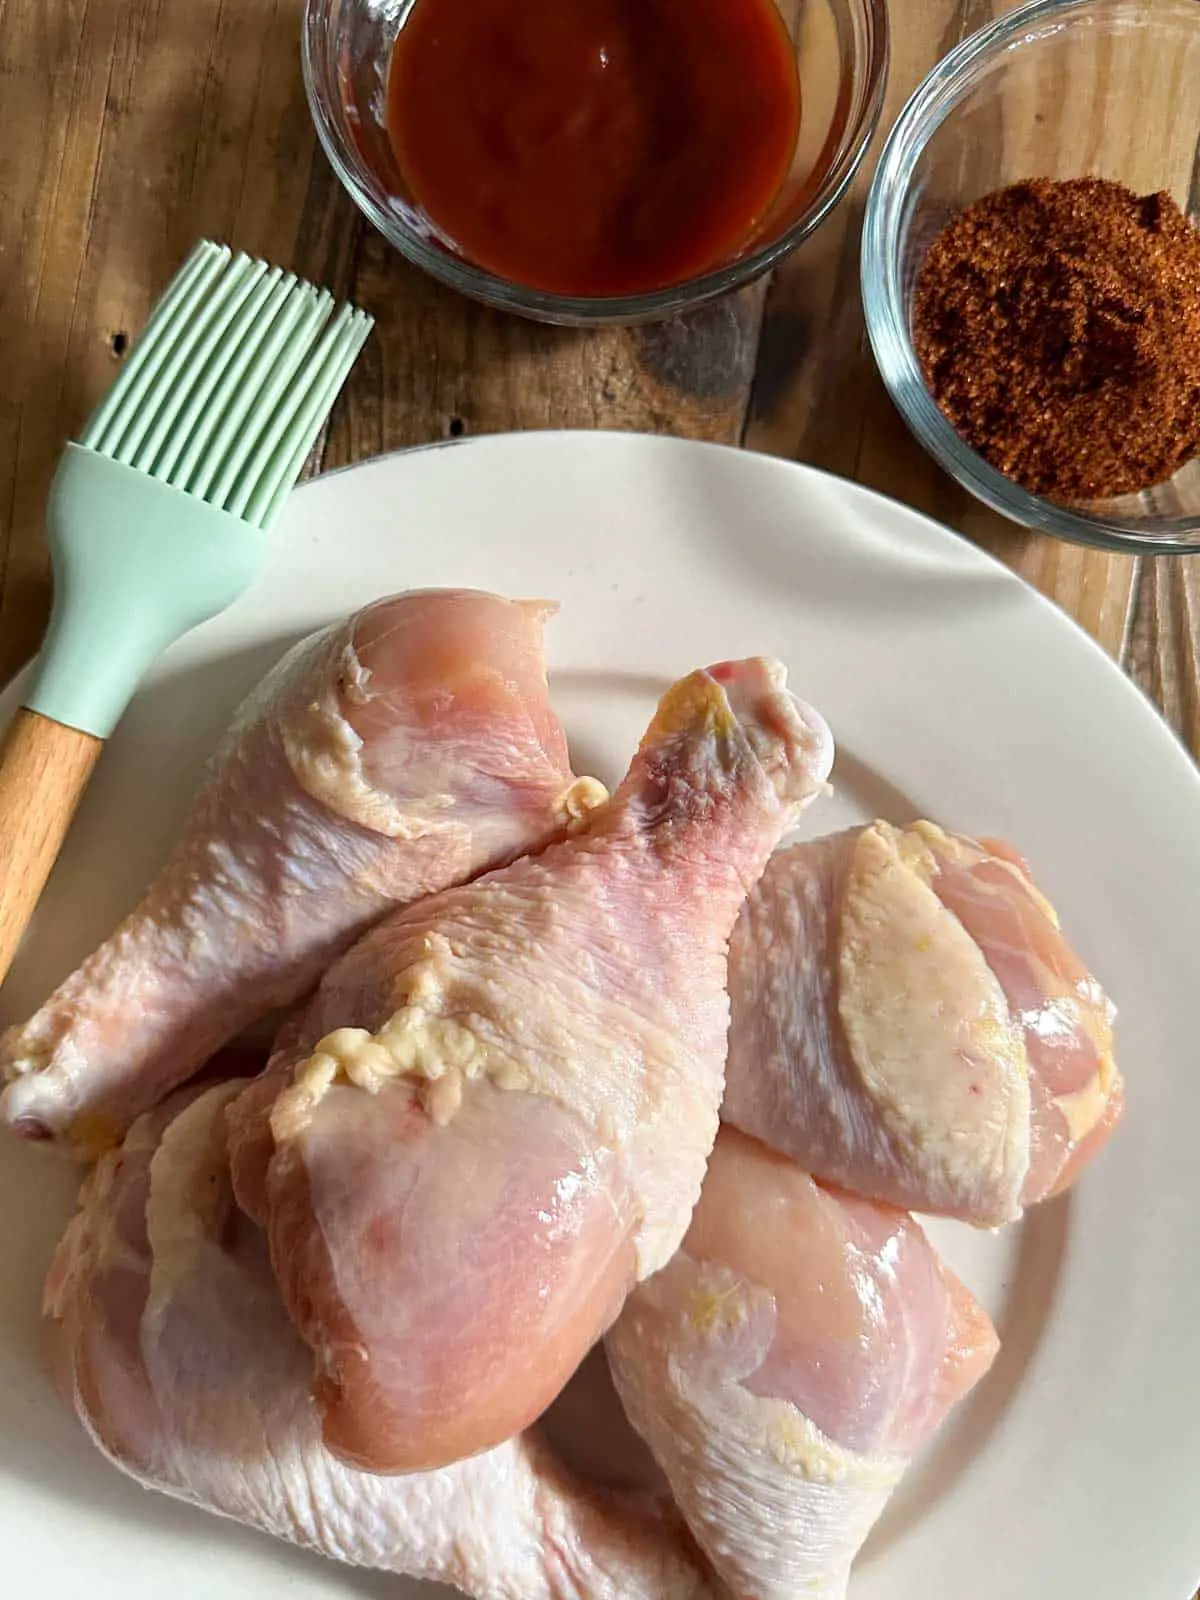 Raw chicken drumsticks on a white plate with a blue silicone utensil resting on the side of the plate, a bowl of barbecue sauce and a bowl of dry rub.